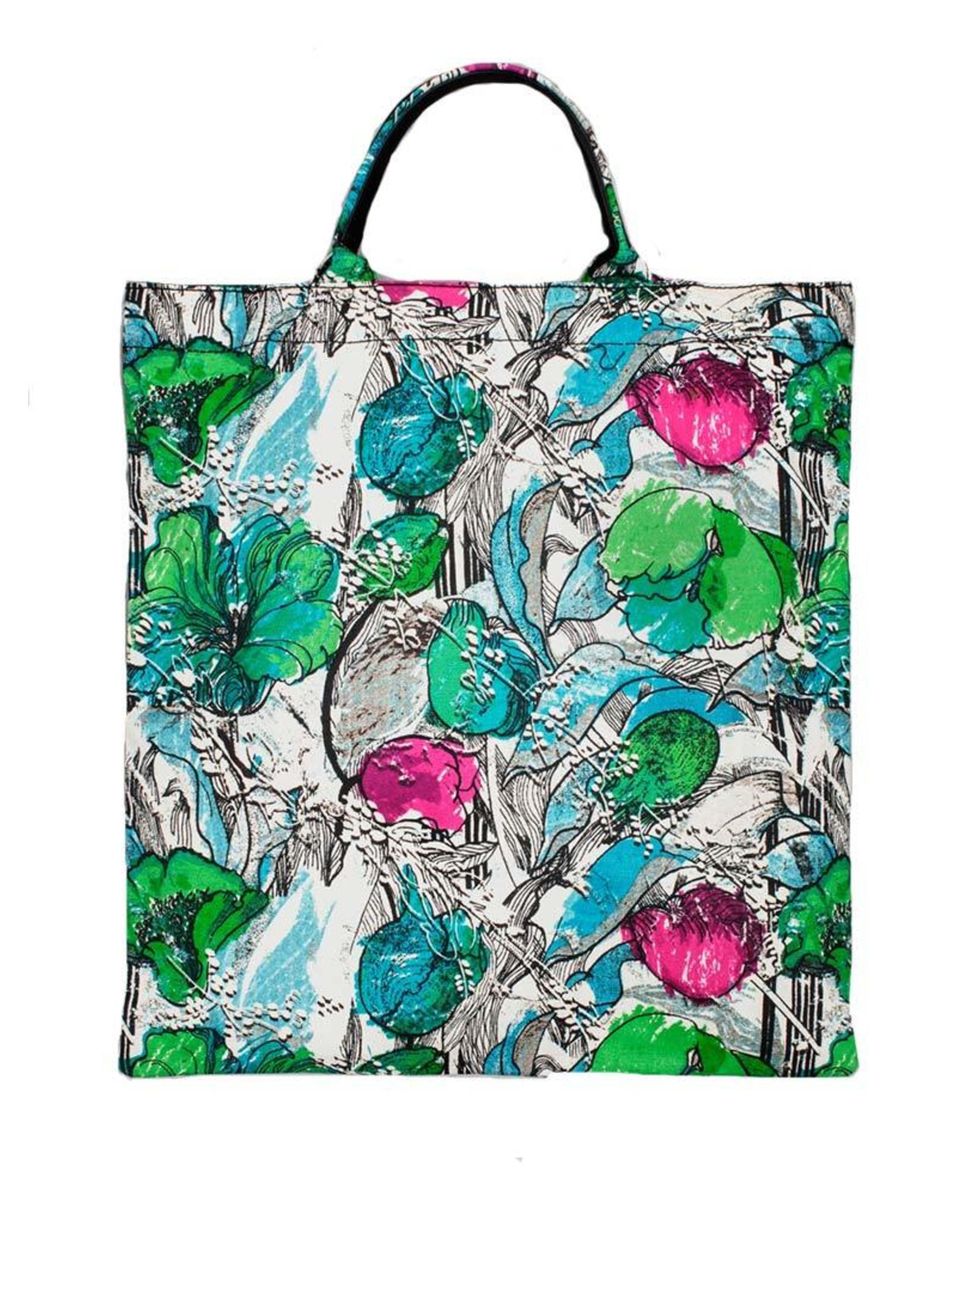 <p>Vintage feeling florals..</p><p>Lightweight tote £19 by <a href="http://www.stories.com/gb/Bags/All_bags/Fabric_Shopper/590765-2334645.1">&amp;OtherStories</a></p>